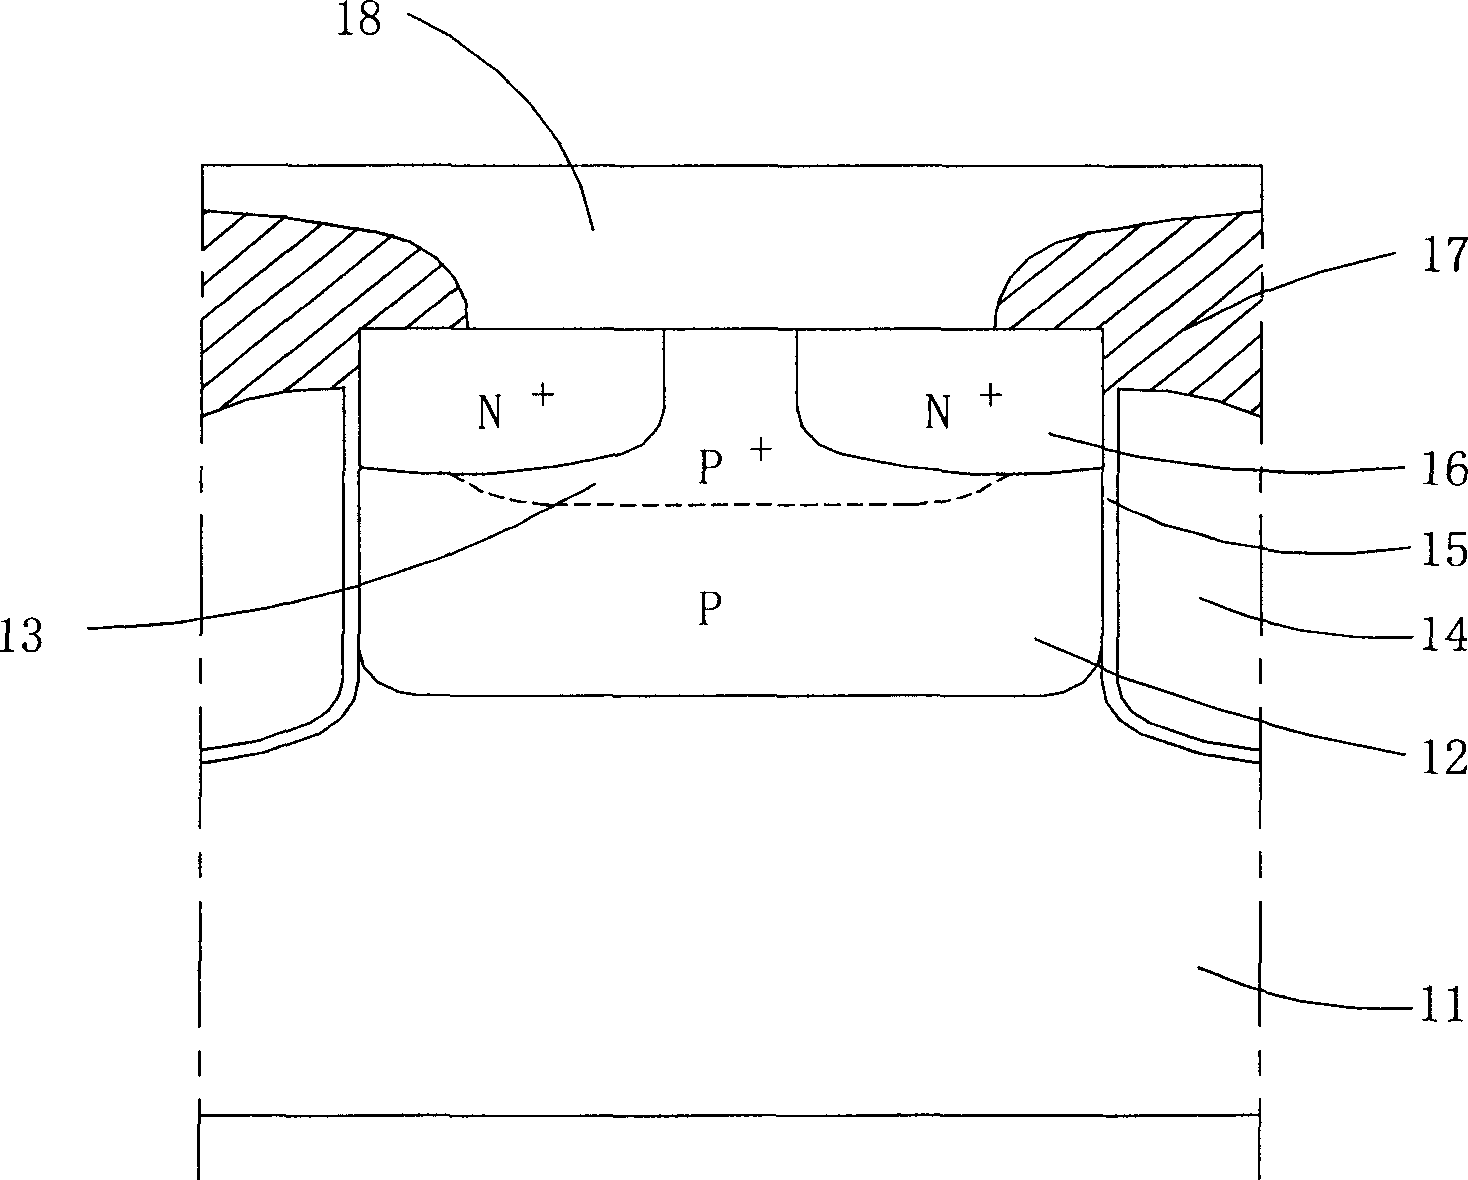 Power semiconductor device with L shaped source